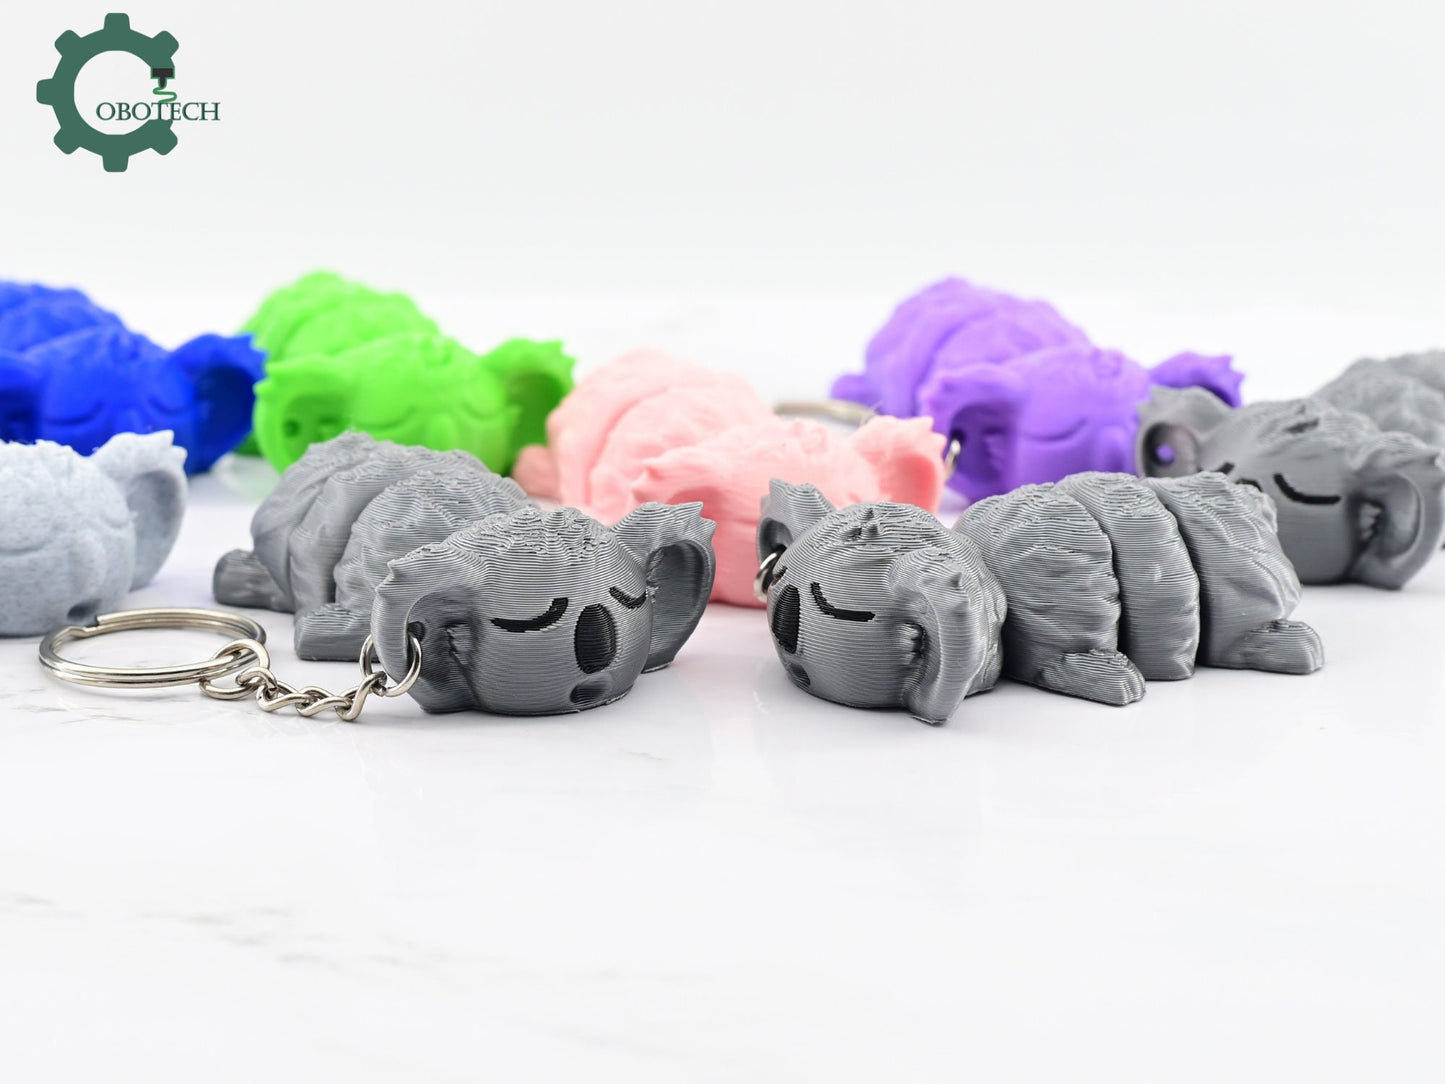 Digital Downloads Cute Articulated Koala Keychain by Cobotech - Cobotech backpack keychain - unique adorable keychain gifts